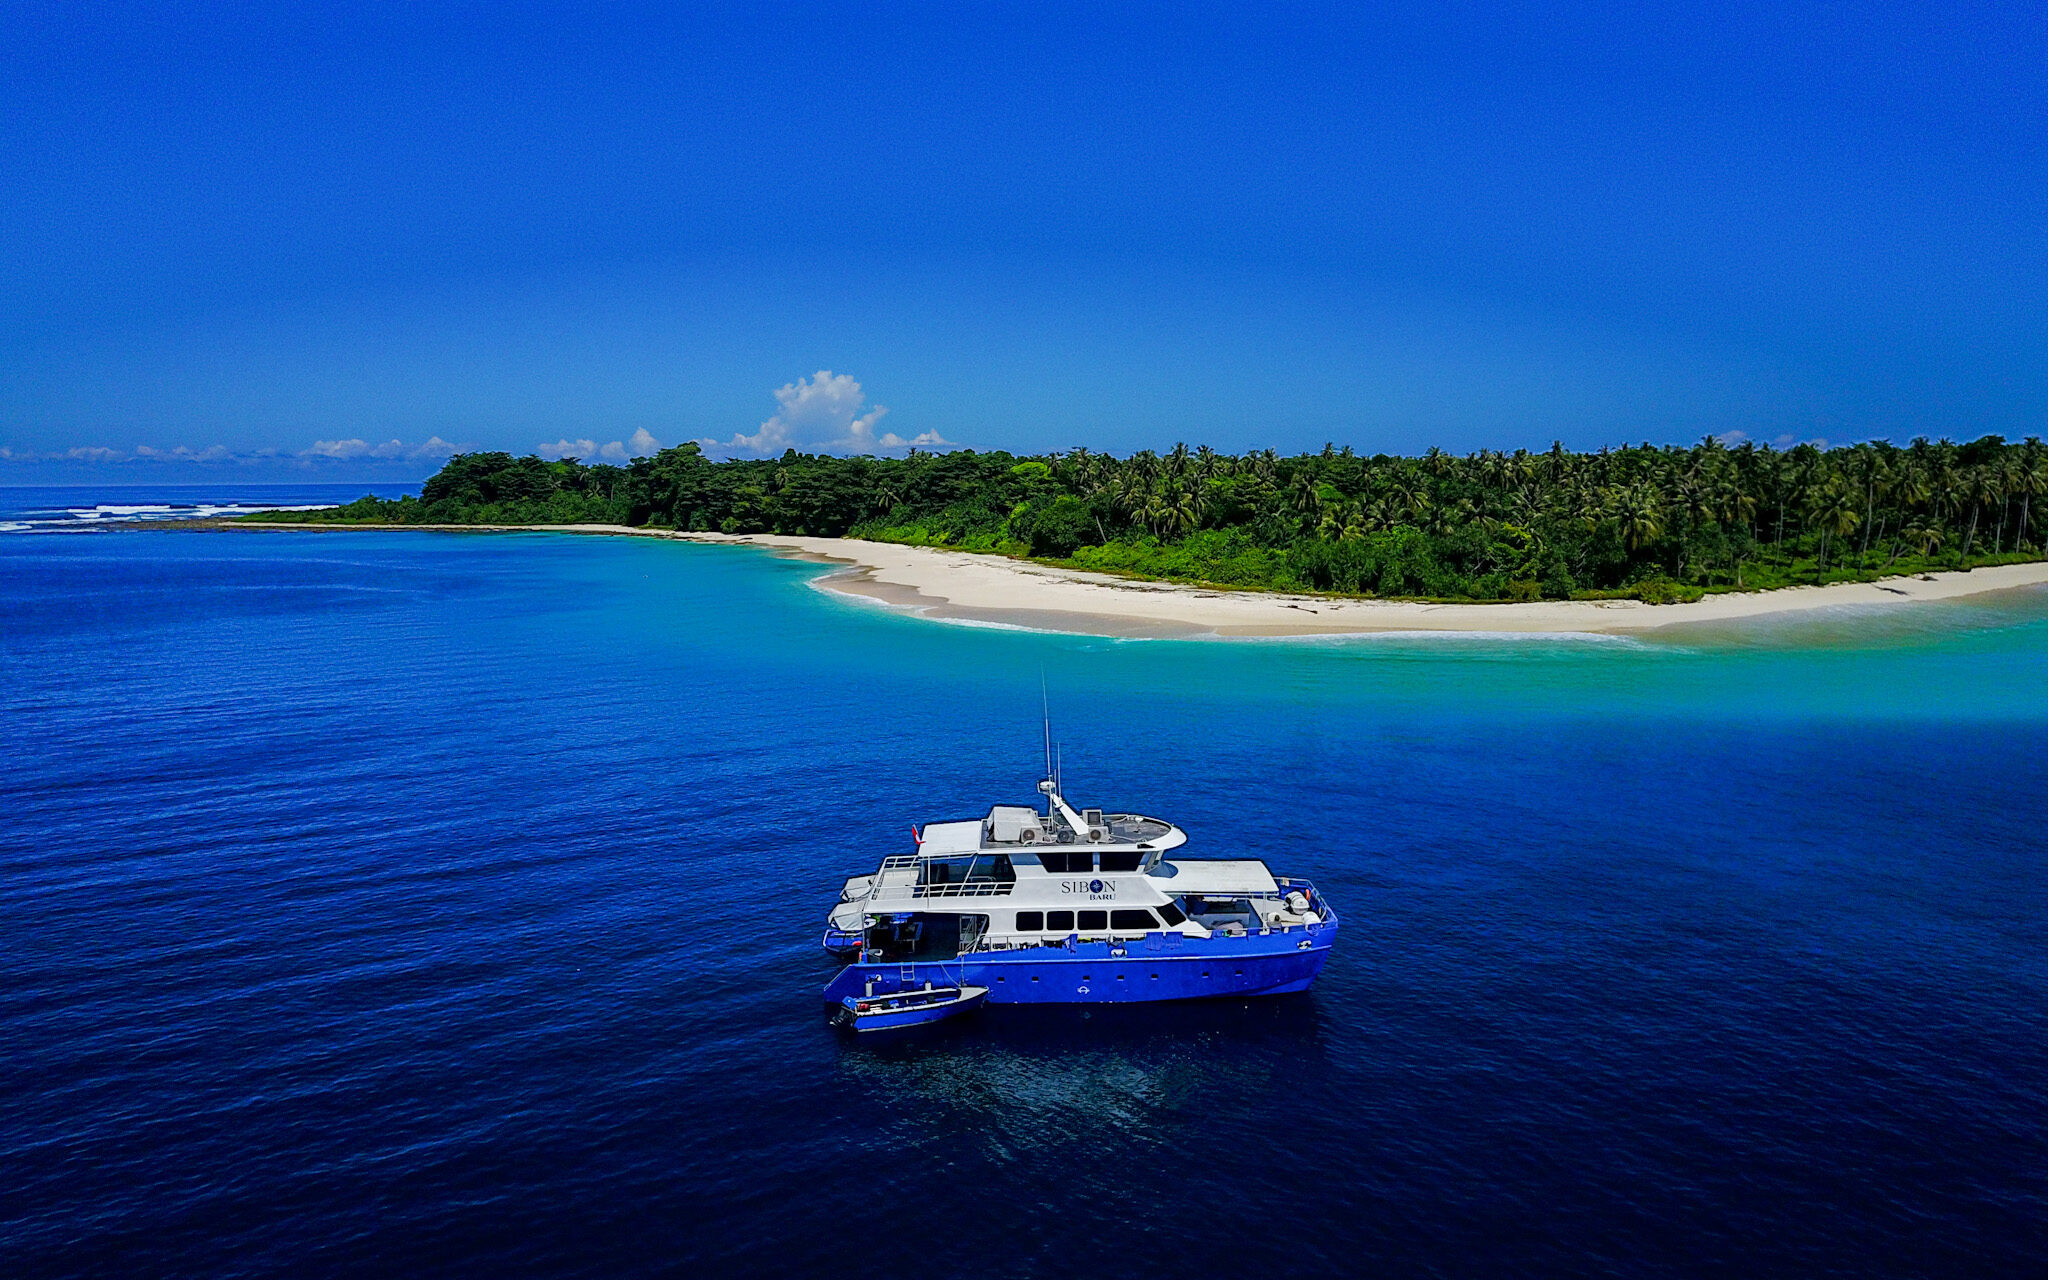 The Sibon Baru surf charter boat cruising in the Mentawai Islands while hunting for perfect waves and barrels